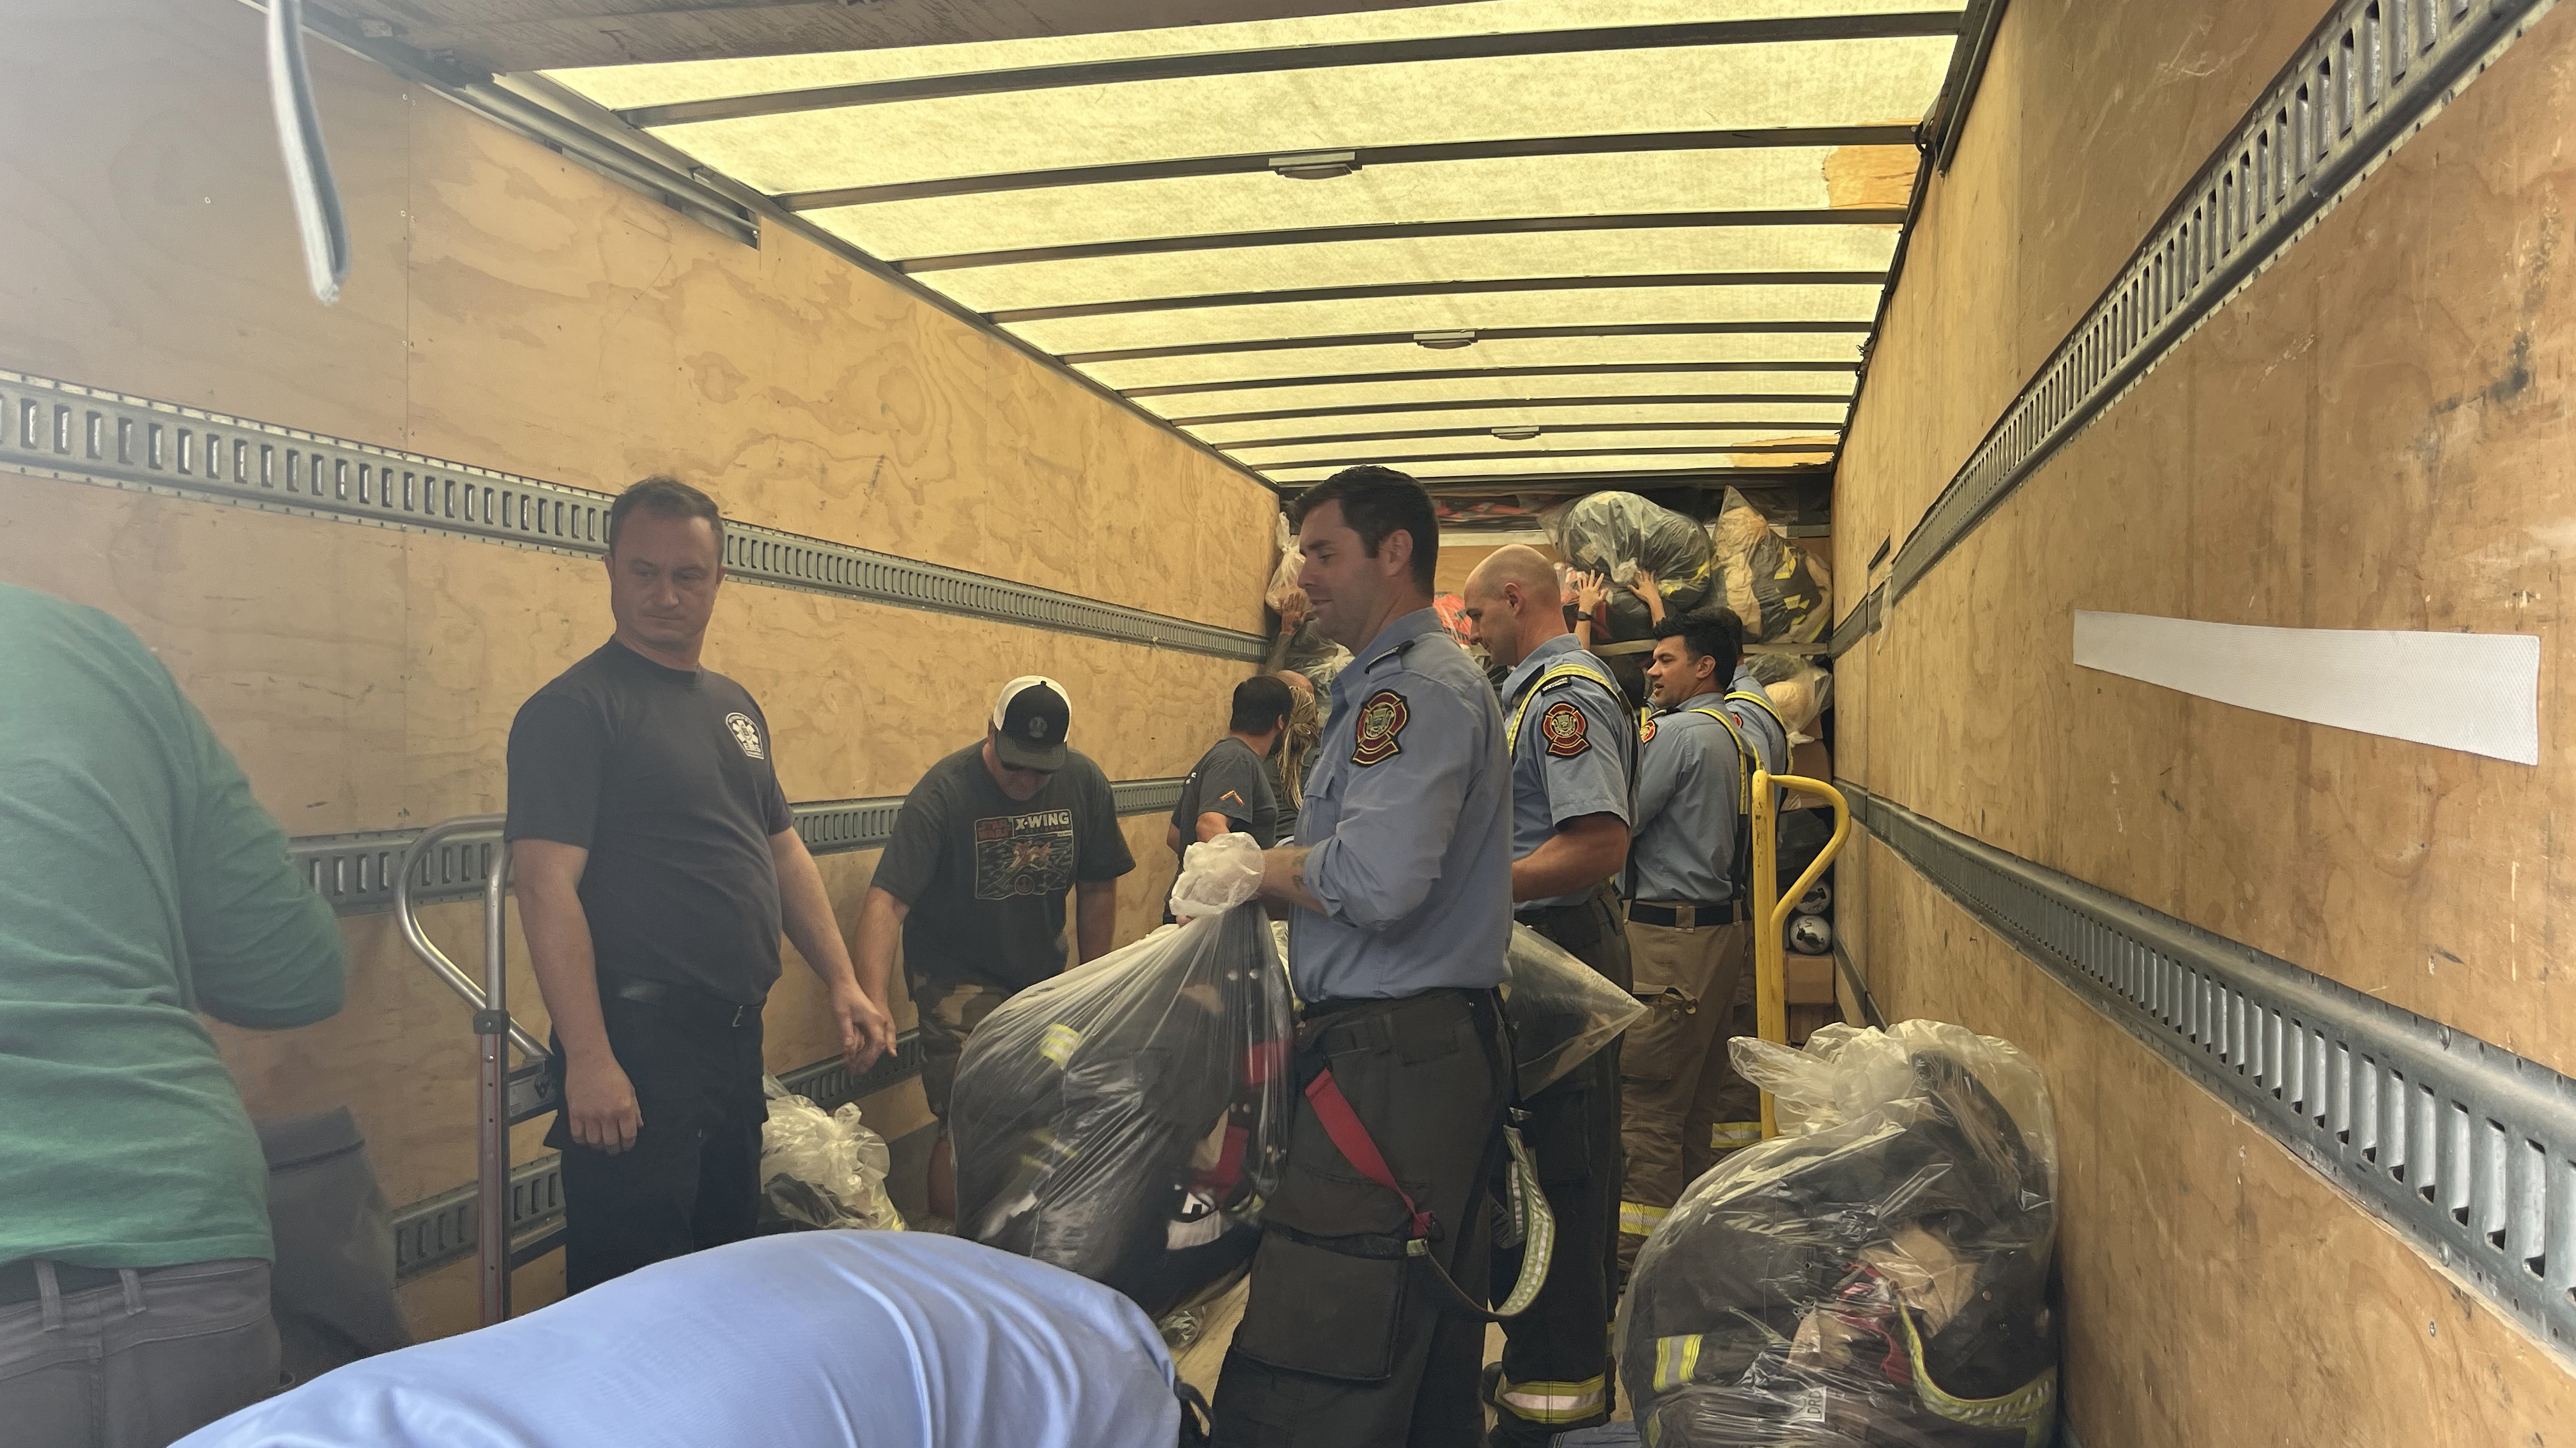 A group of people, including firefighters, pack equipment into a truck.